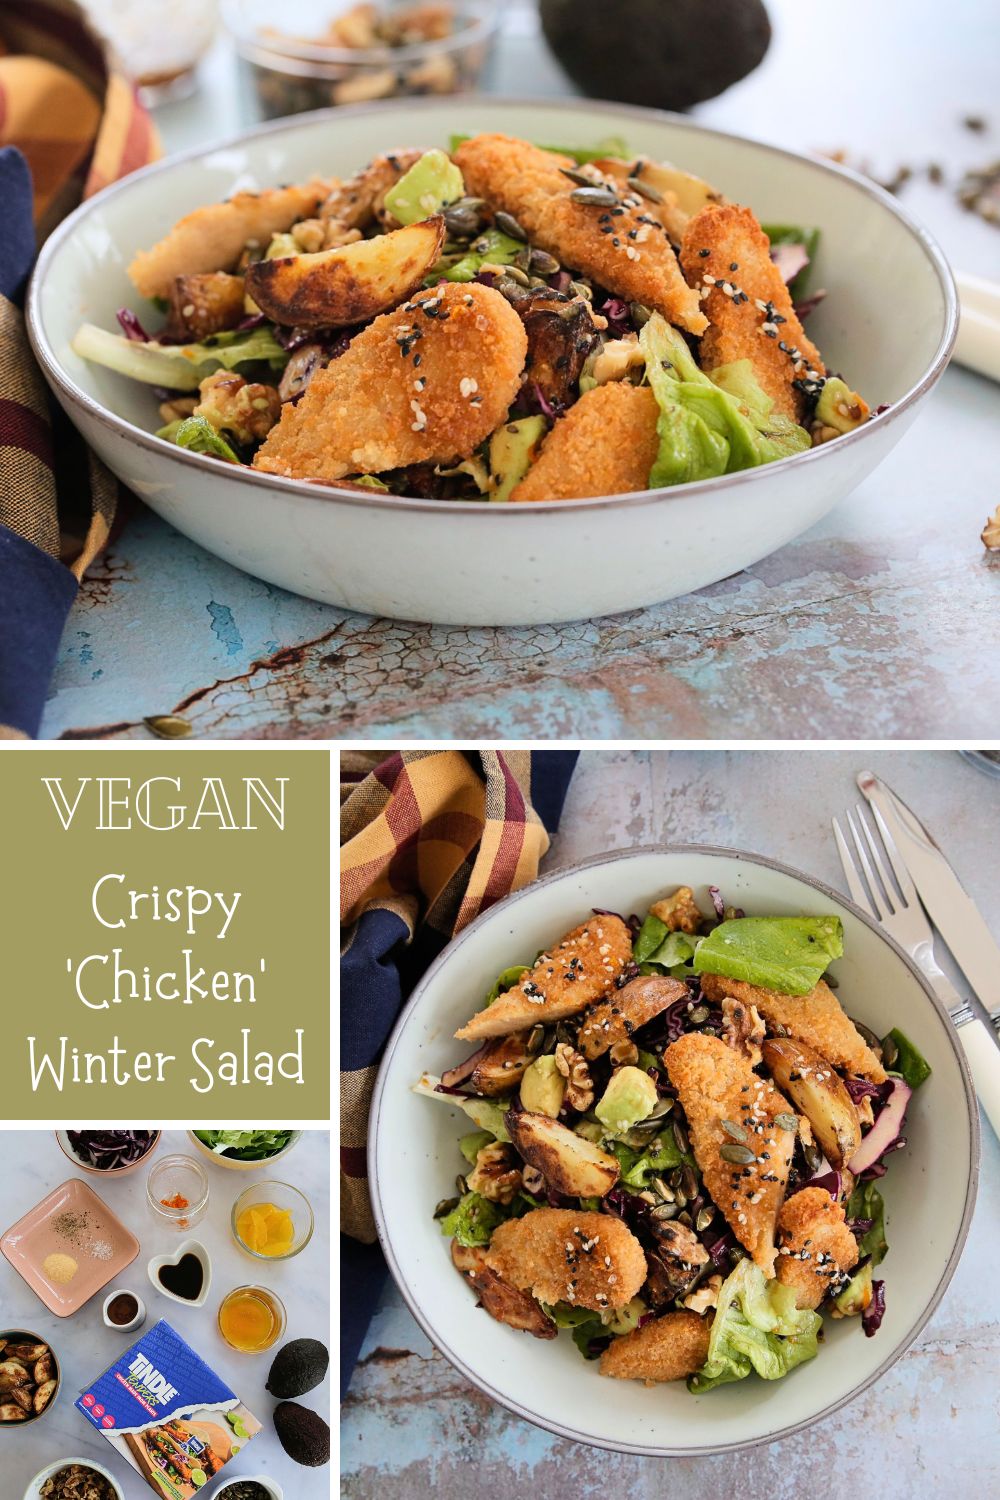 A warm winter vegan salad recipe with crunchy fresh veggies, plant based chicken tenders and a spiced sesame orange salad dressing. A totally delicious but easy vegan lunch idea. Recipe on thecookandhim.com | #vegansaladrecipes #vegansaladdressing #saladrecipes #meatlessmeal #plantbasedrecipes